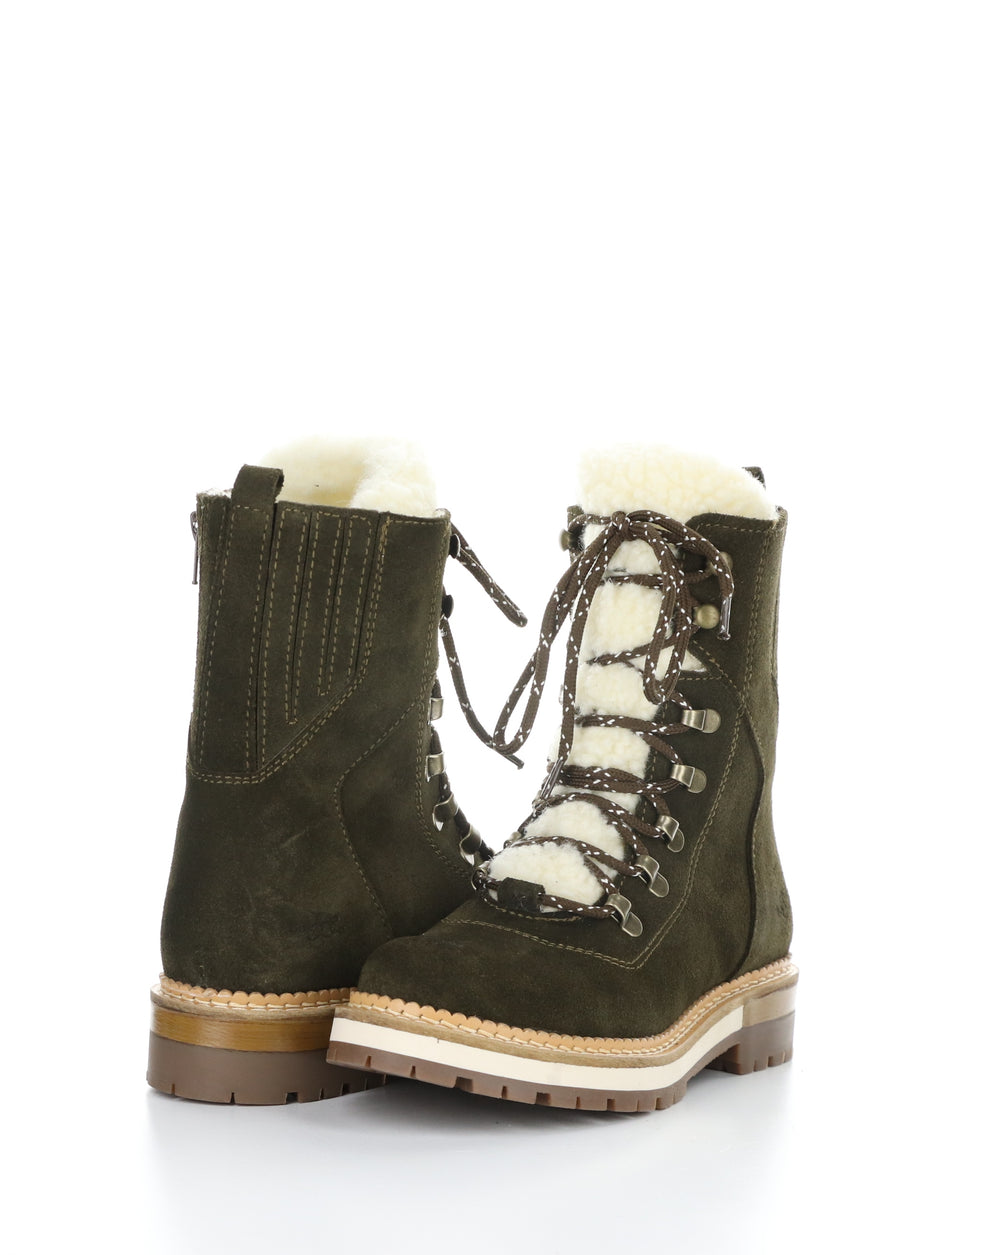 ADA OLIVE Round Toe Boots